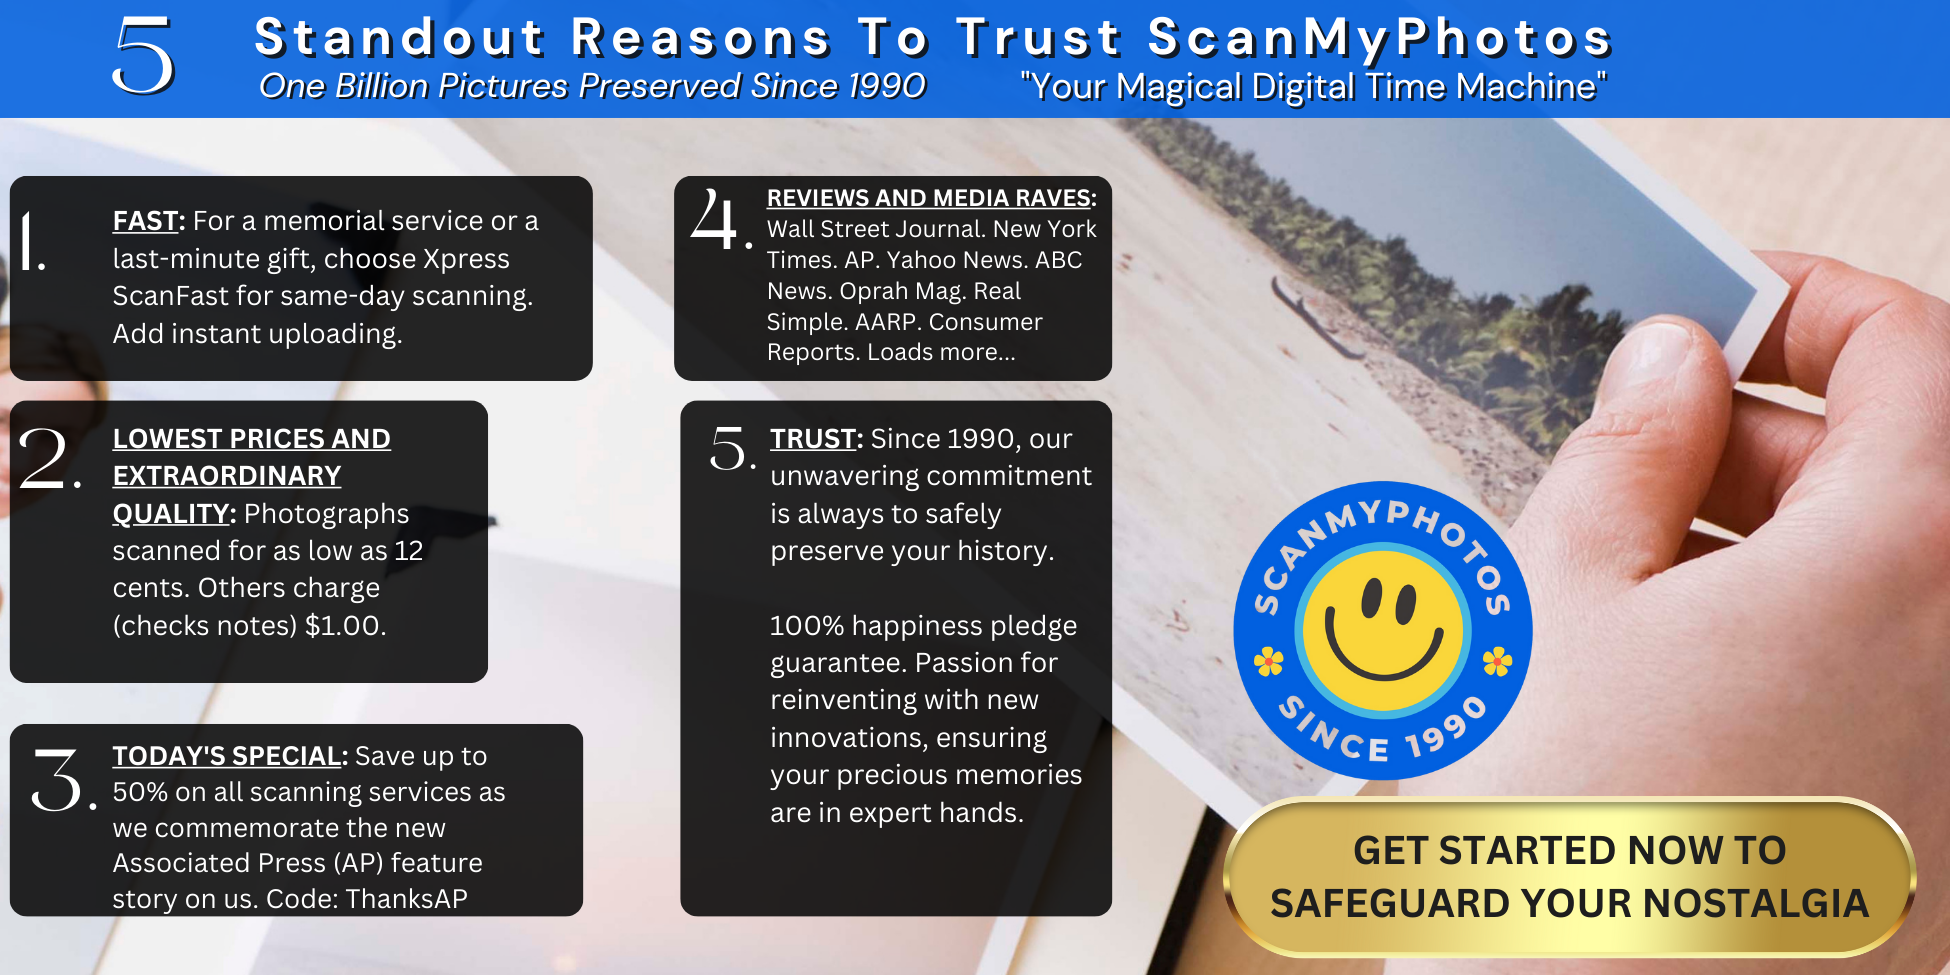 infographic826NEW 3 - Photo Scanning Reviews: What People Are Saying About ScanMyPhotos